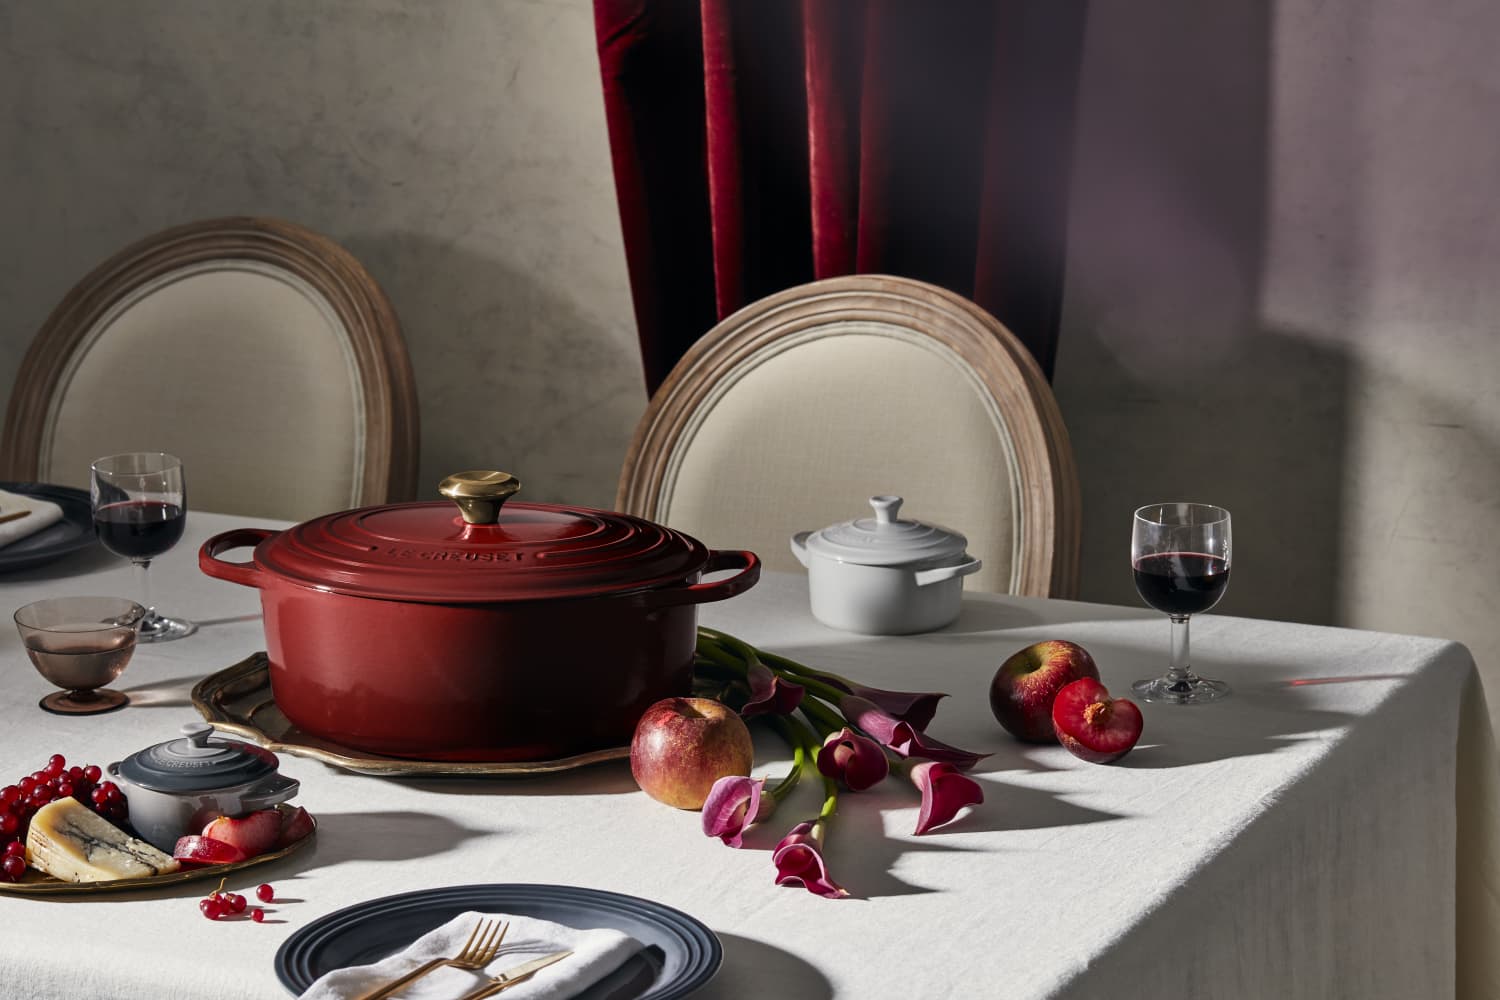 Creuset Just Launched a New Hue: Rhone Kitchn